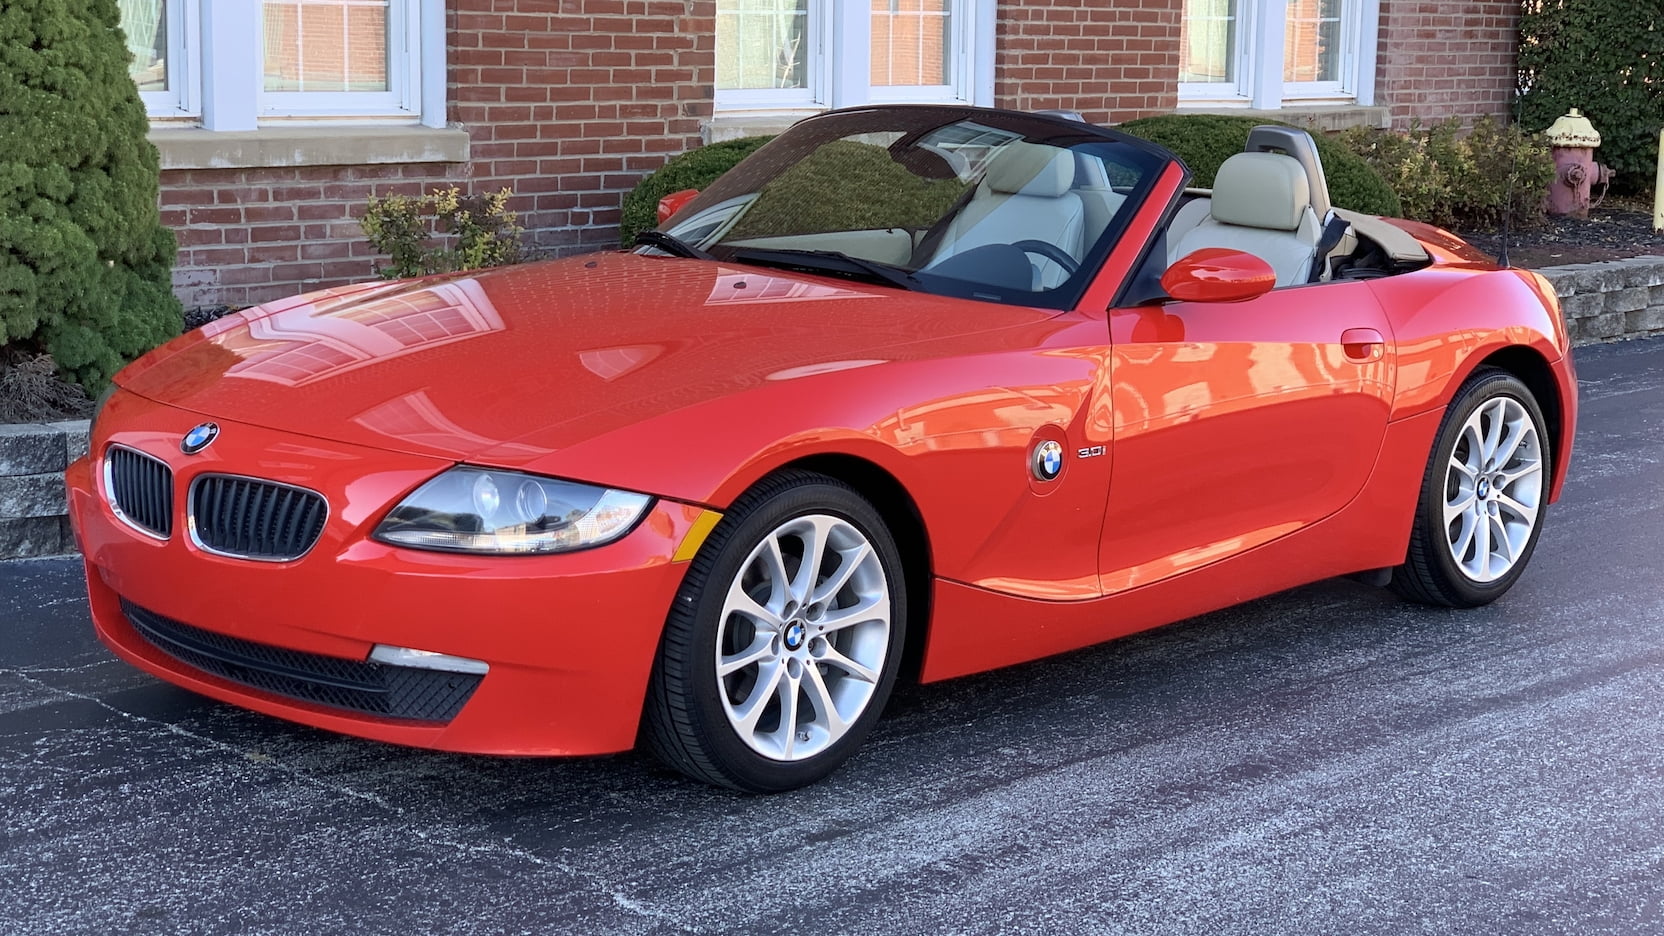 2007 BMW Z4 Convertible | T95 | Chicago 2019